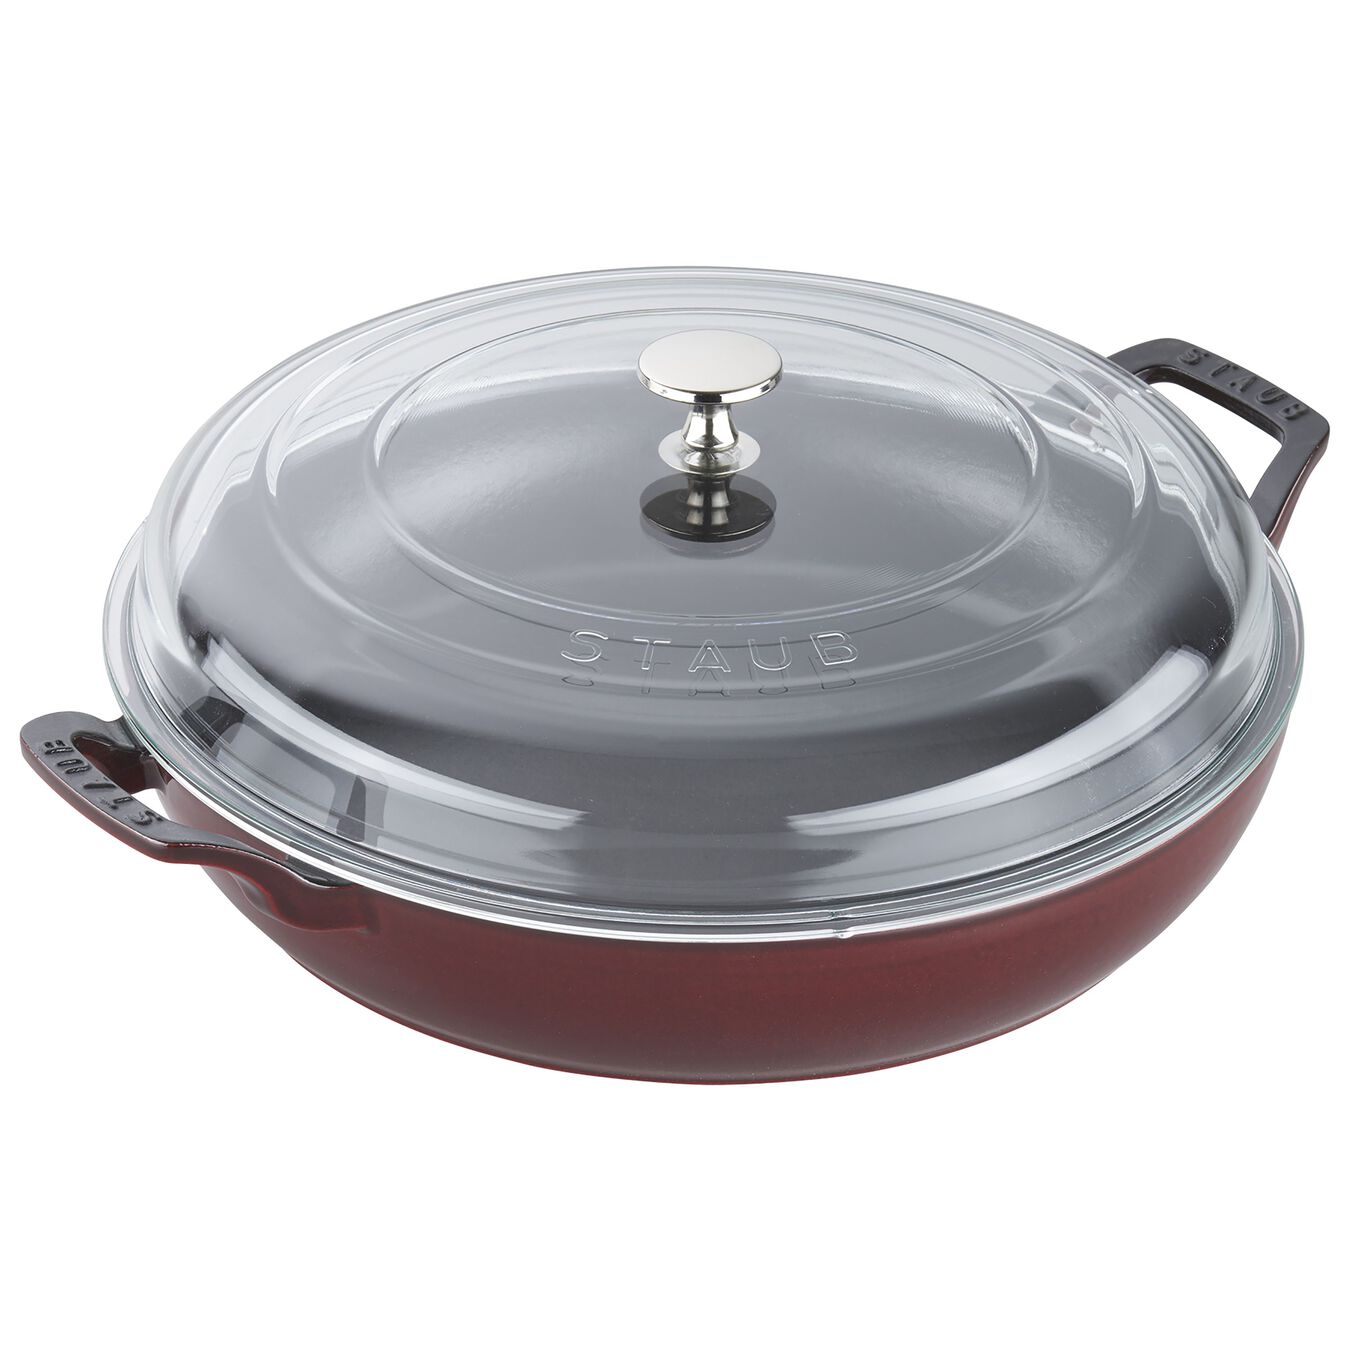 12-inch, Braiser with Glass Lid, grenadine,,large 1